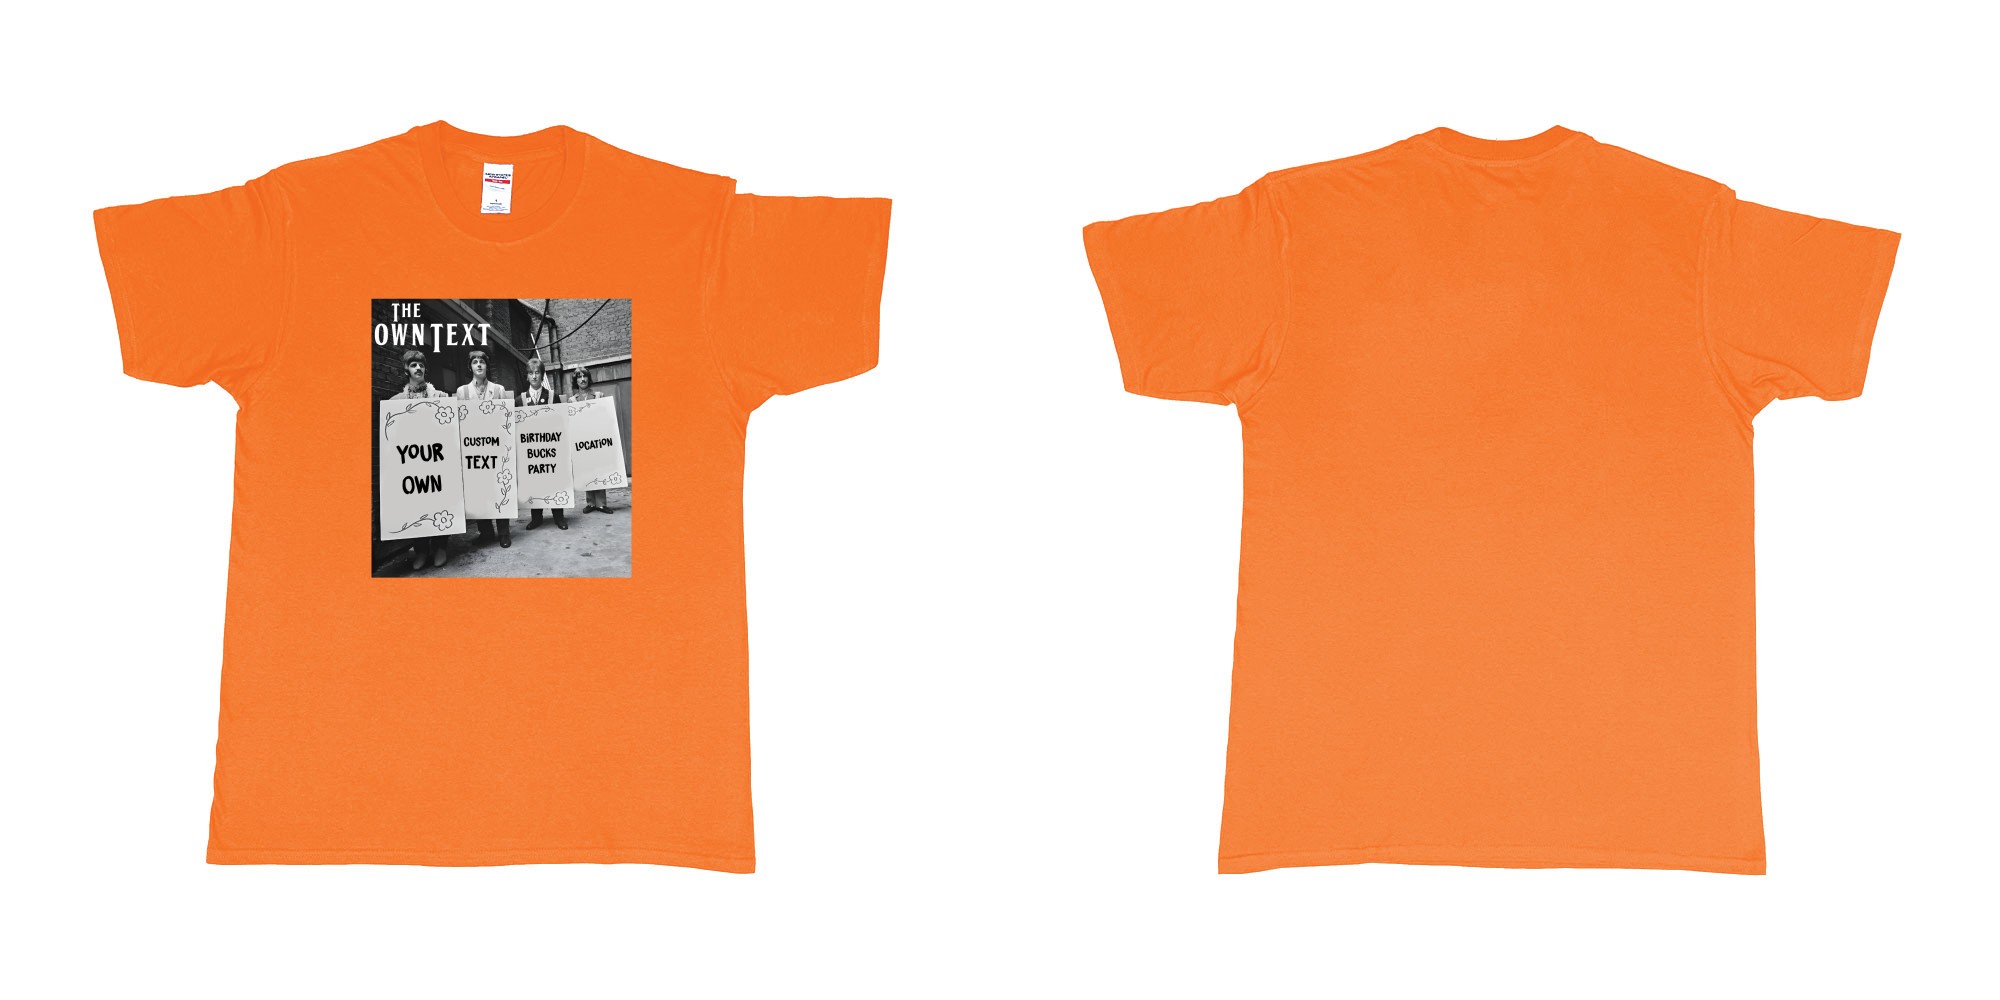 Custom tshirt design the beatles holding signs custom text in fabric color orange choice your own text made in Bali by The Pirate Way